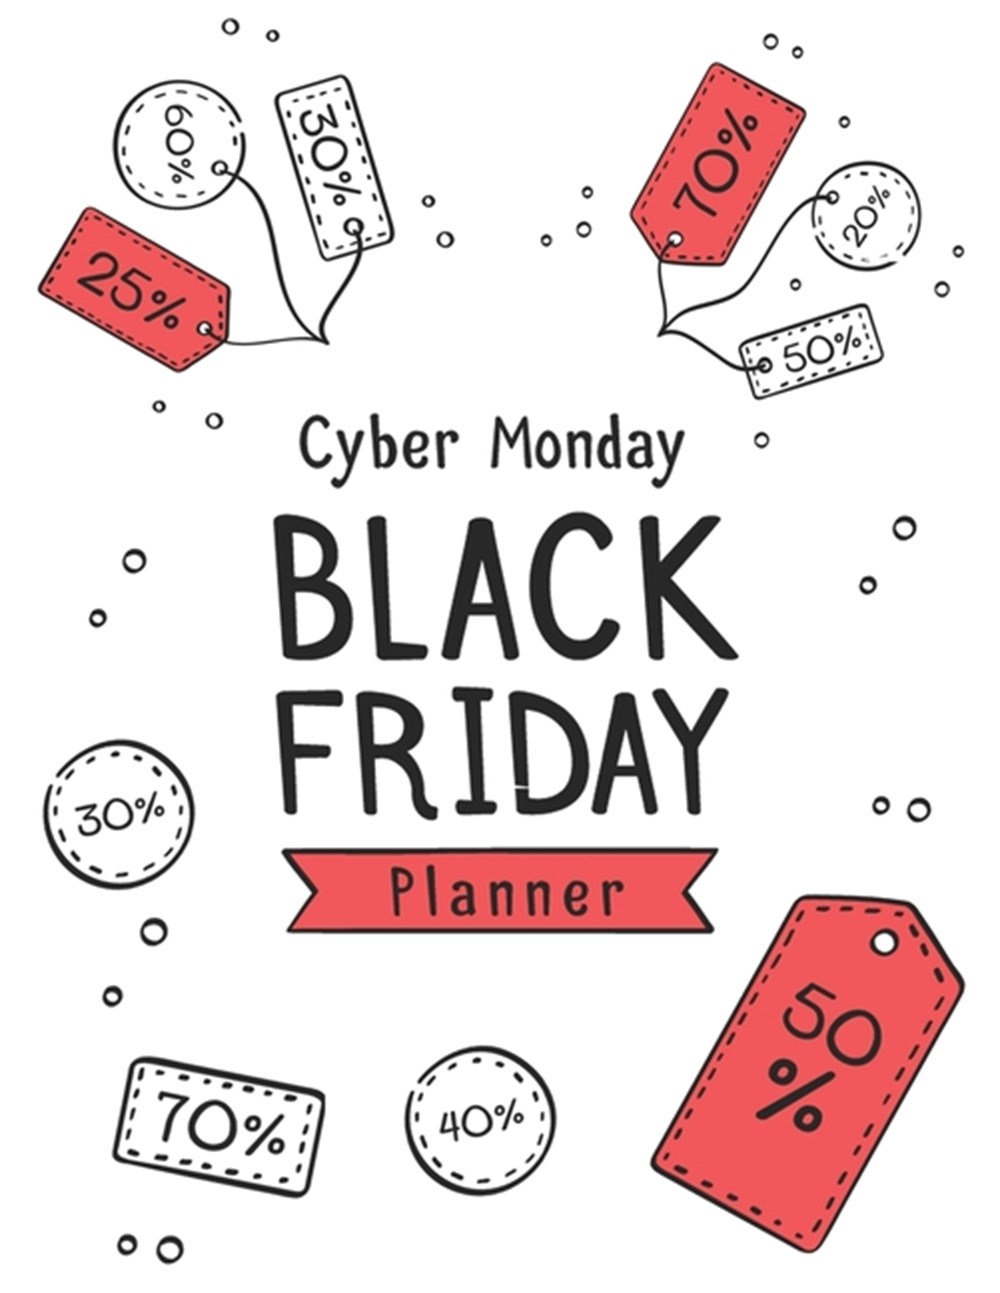 Black Friday & Cyber Monday Planner Countdown Planning to Find the Deals and Best Coupons to Use for